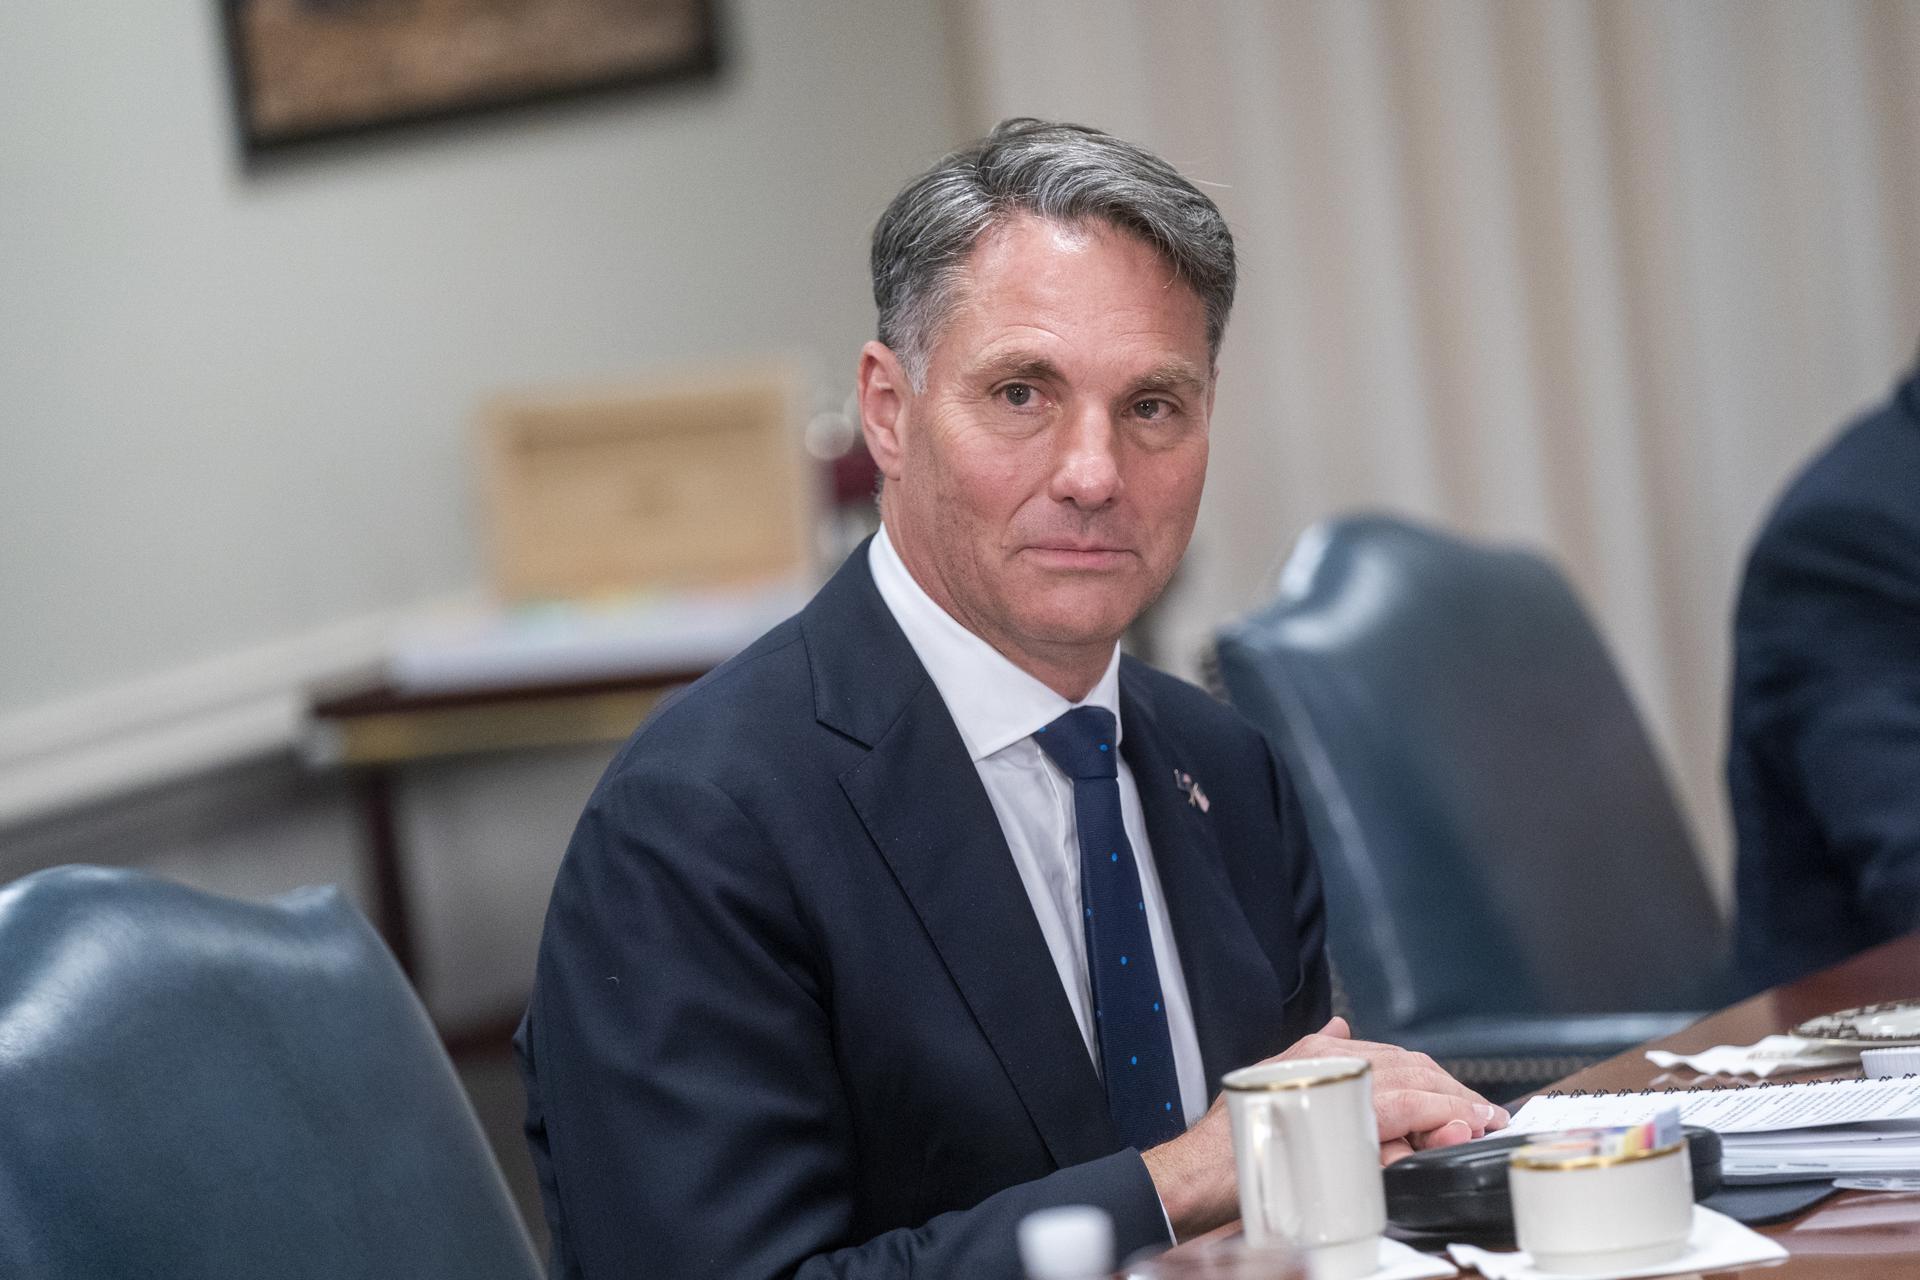 Australian Minister of Defense Richard Marles delivers remarks, during a meeting with US Secretary of Defense Lloyd Austin at the Pentagon in Arlington, Virginia, US, 13 July 2022. EFE-EPA FILE/SHAWN THEW